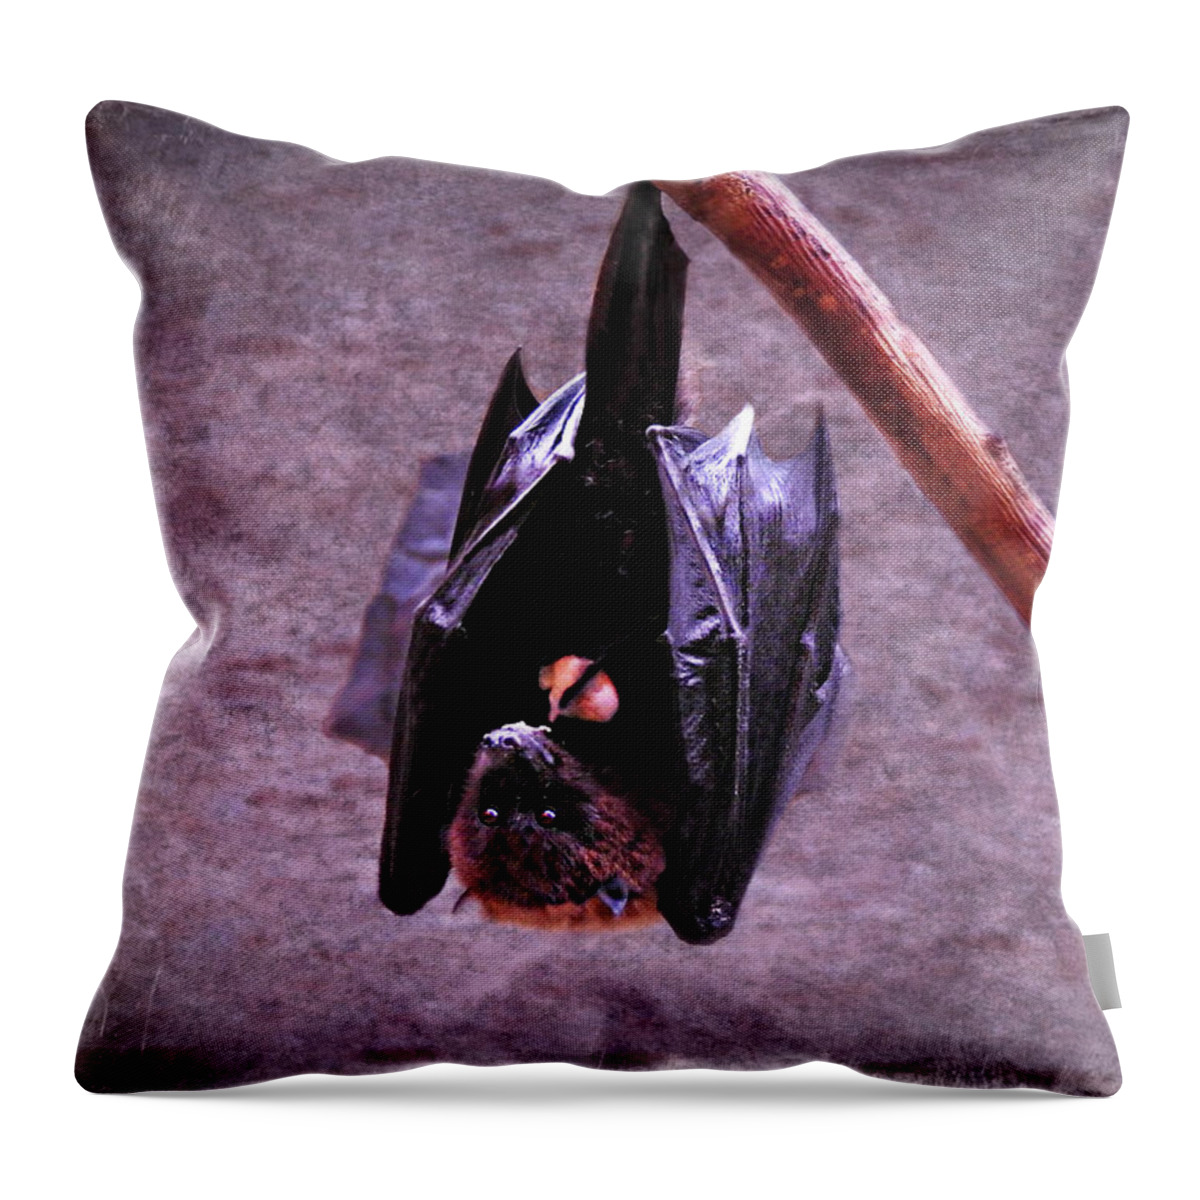 Fruit Bat Throw Pillow featuring the photograph Fruit Bat by Dark Whimsy